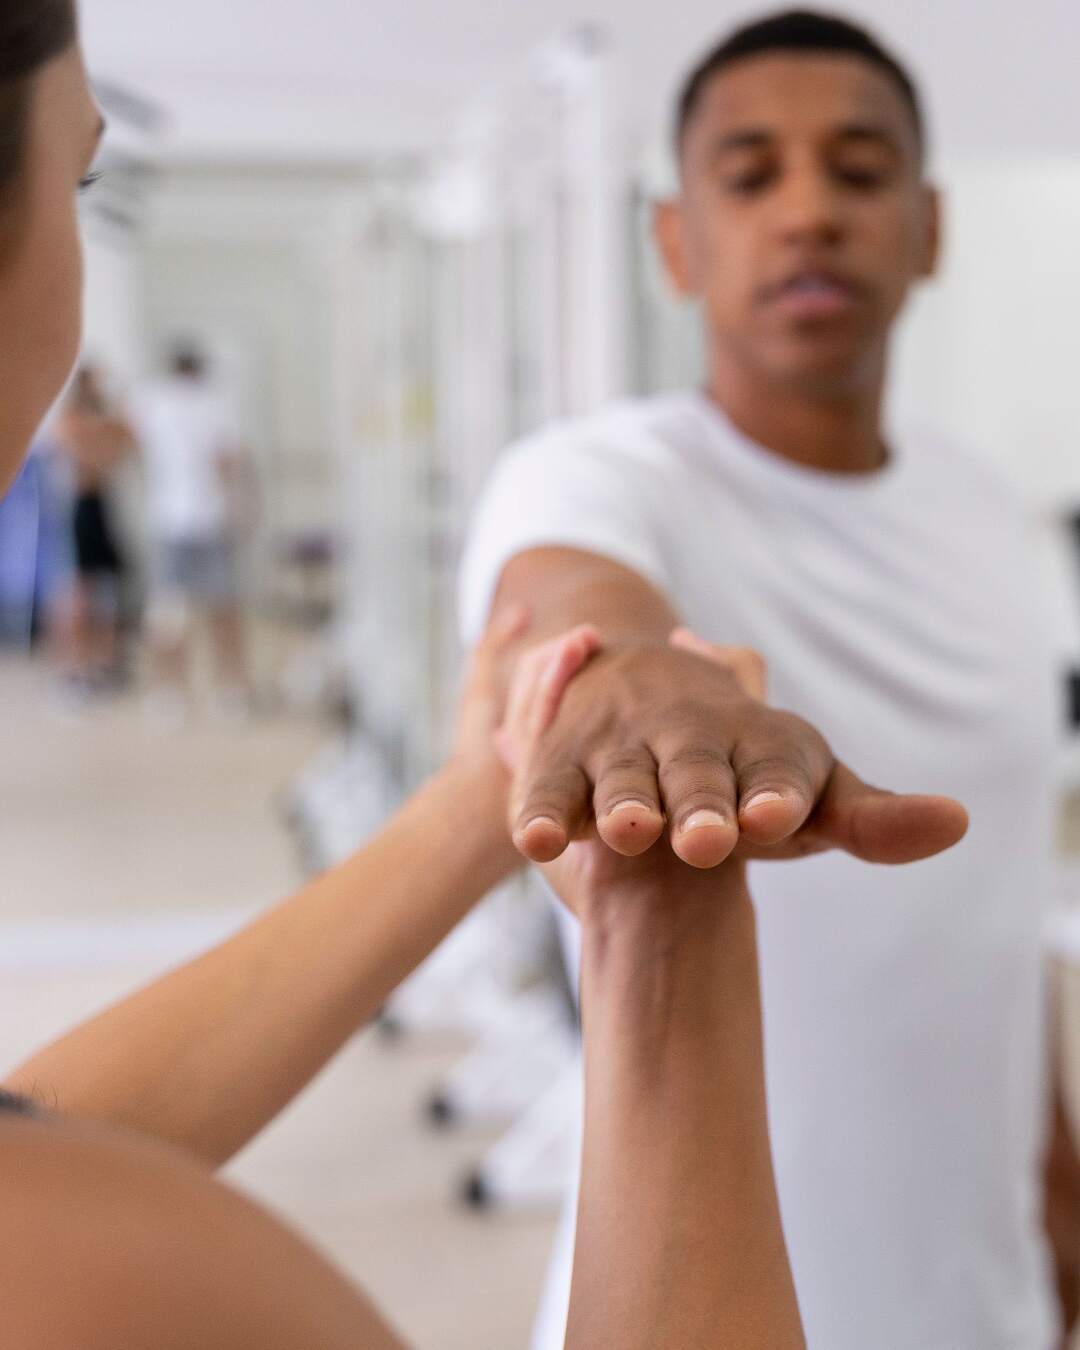 physical therapist works with a patient to assess an injury to the arm and shoulder